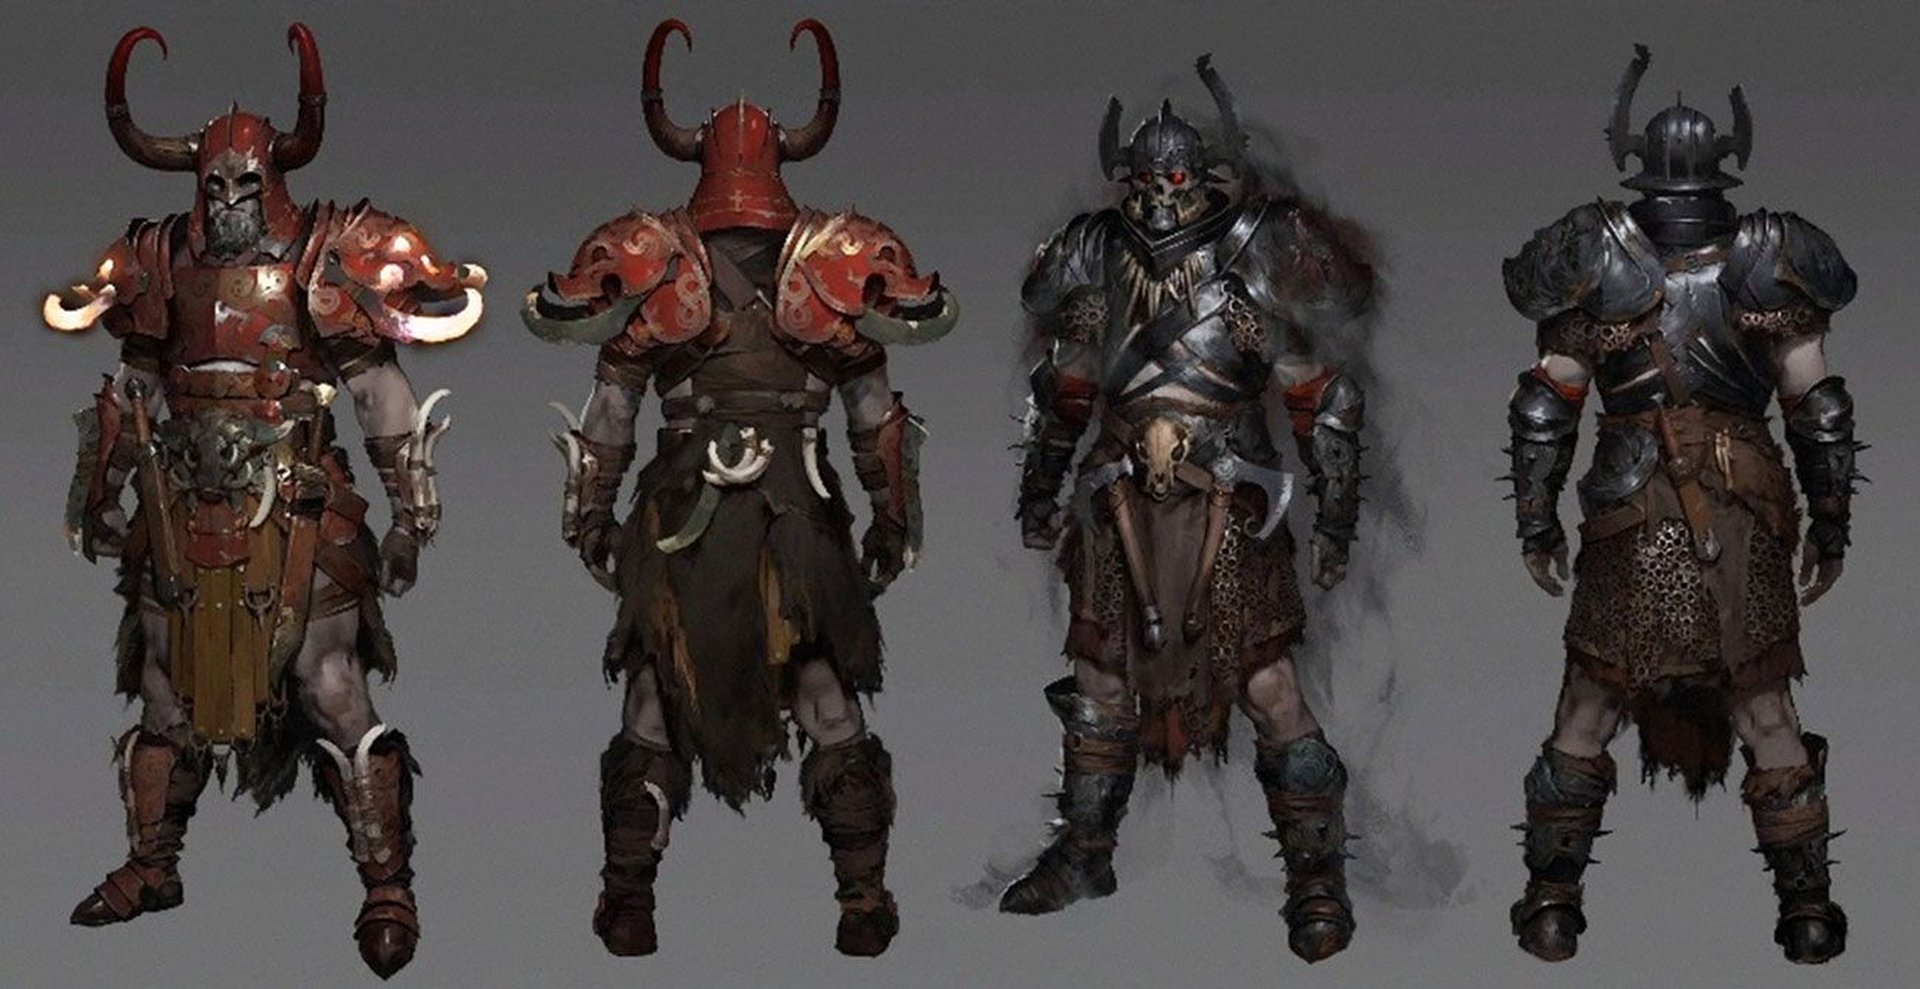 Dynamic illustration of Diablo 4 heroes showcasing diverse class builds in combat against the forces of evil in Sanctuary.